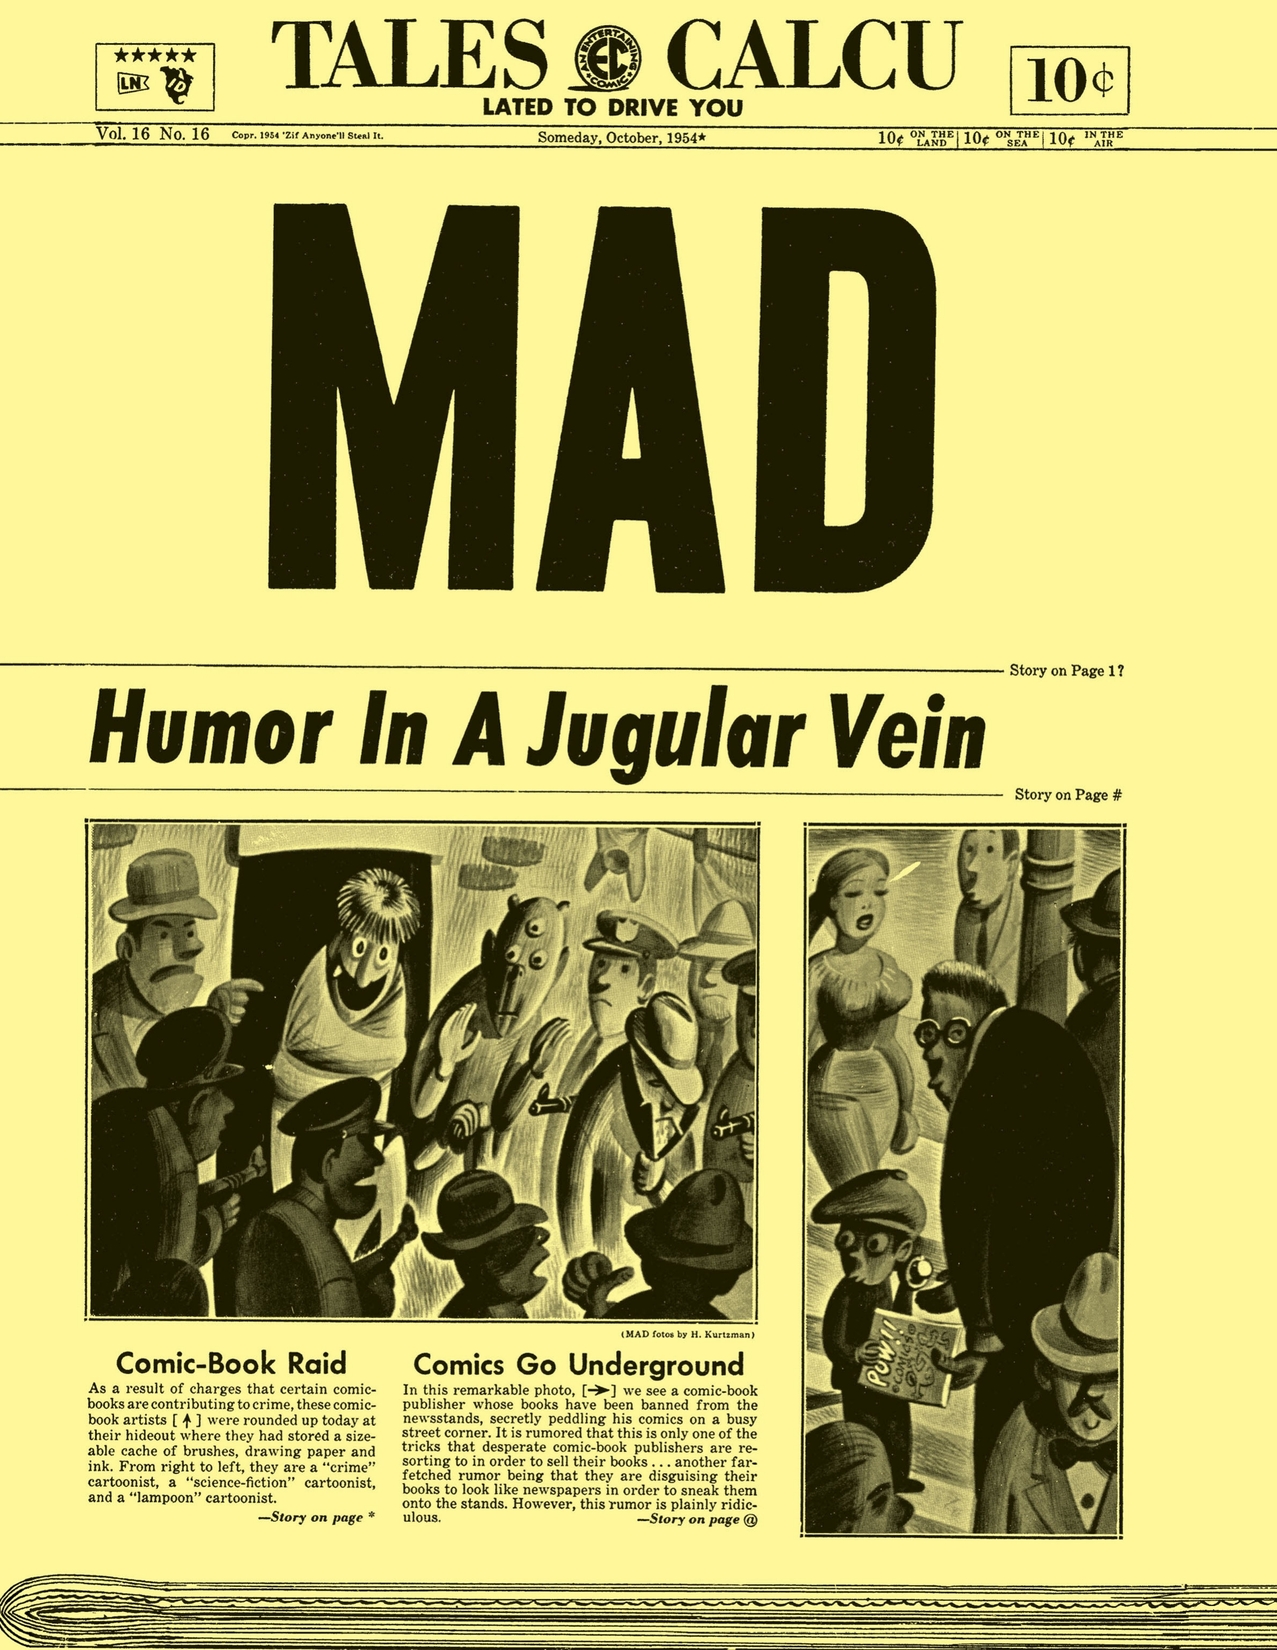 MAD Magazine #16 preview images